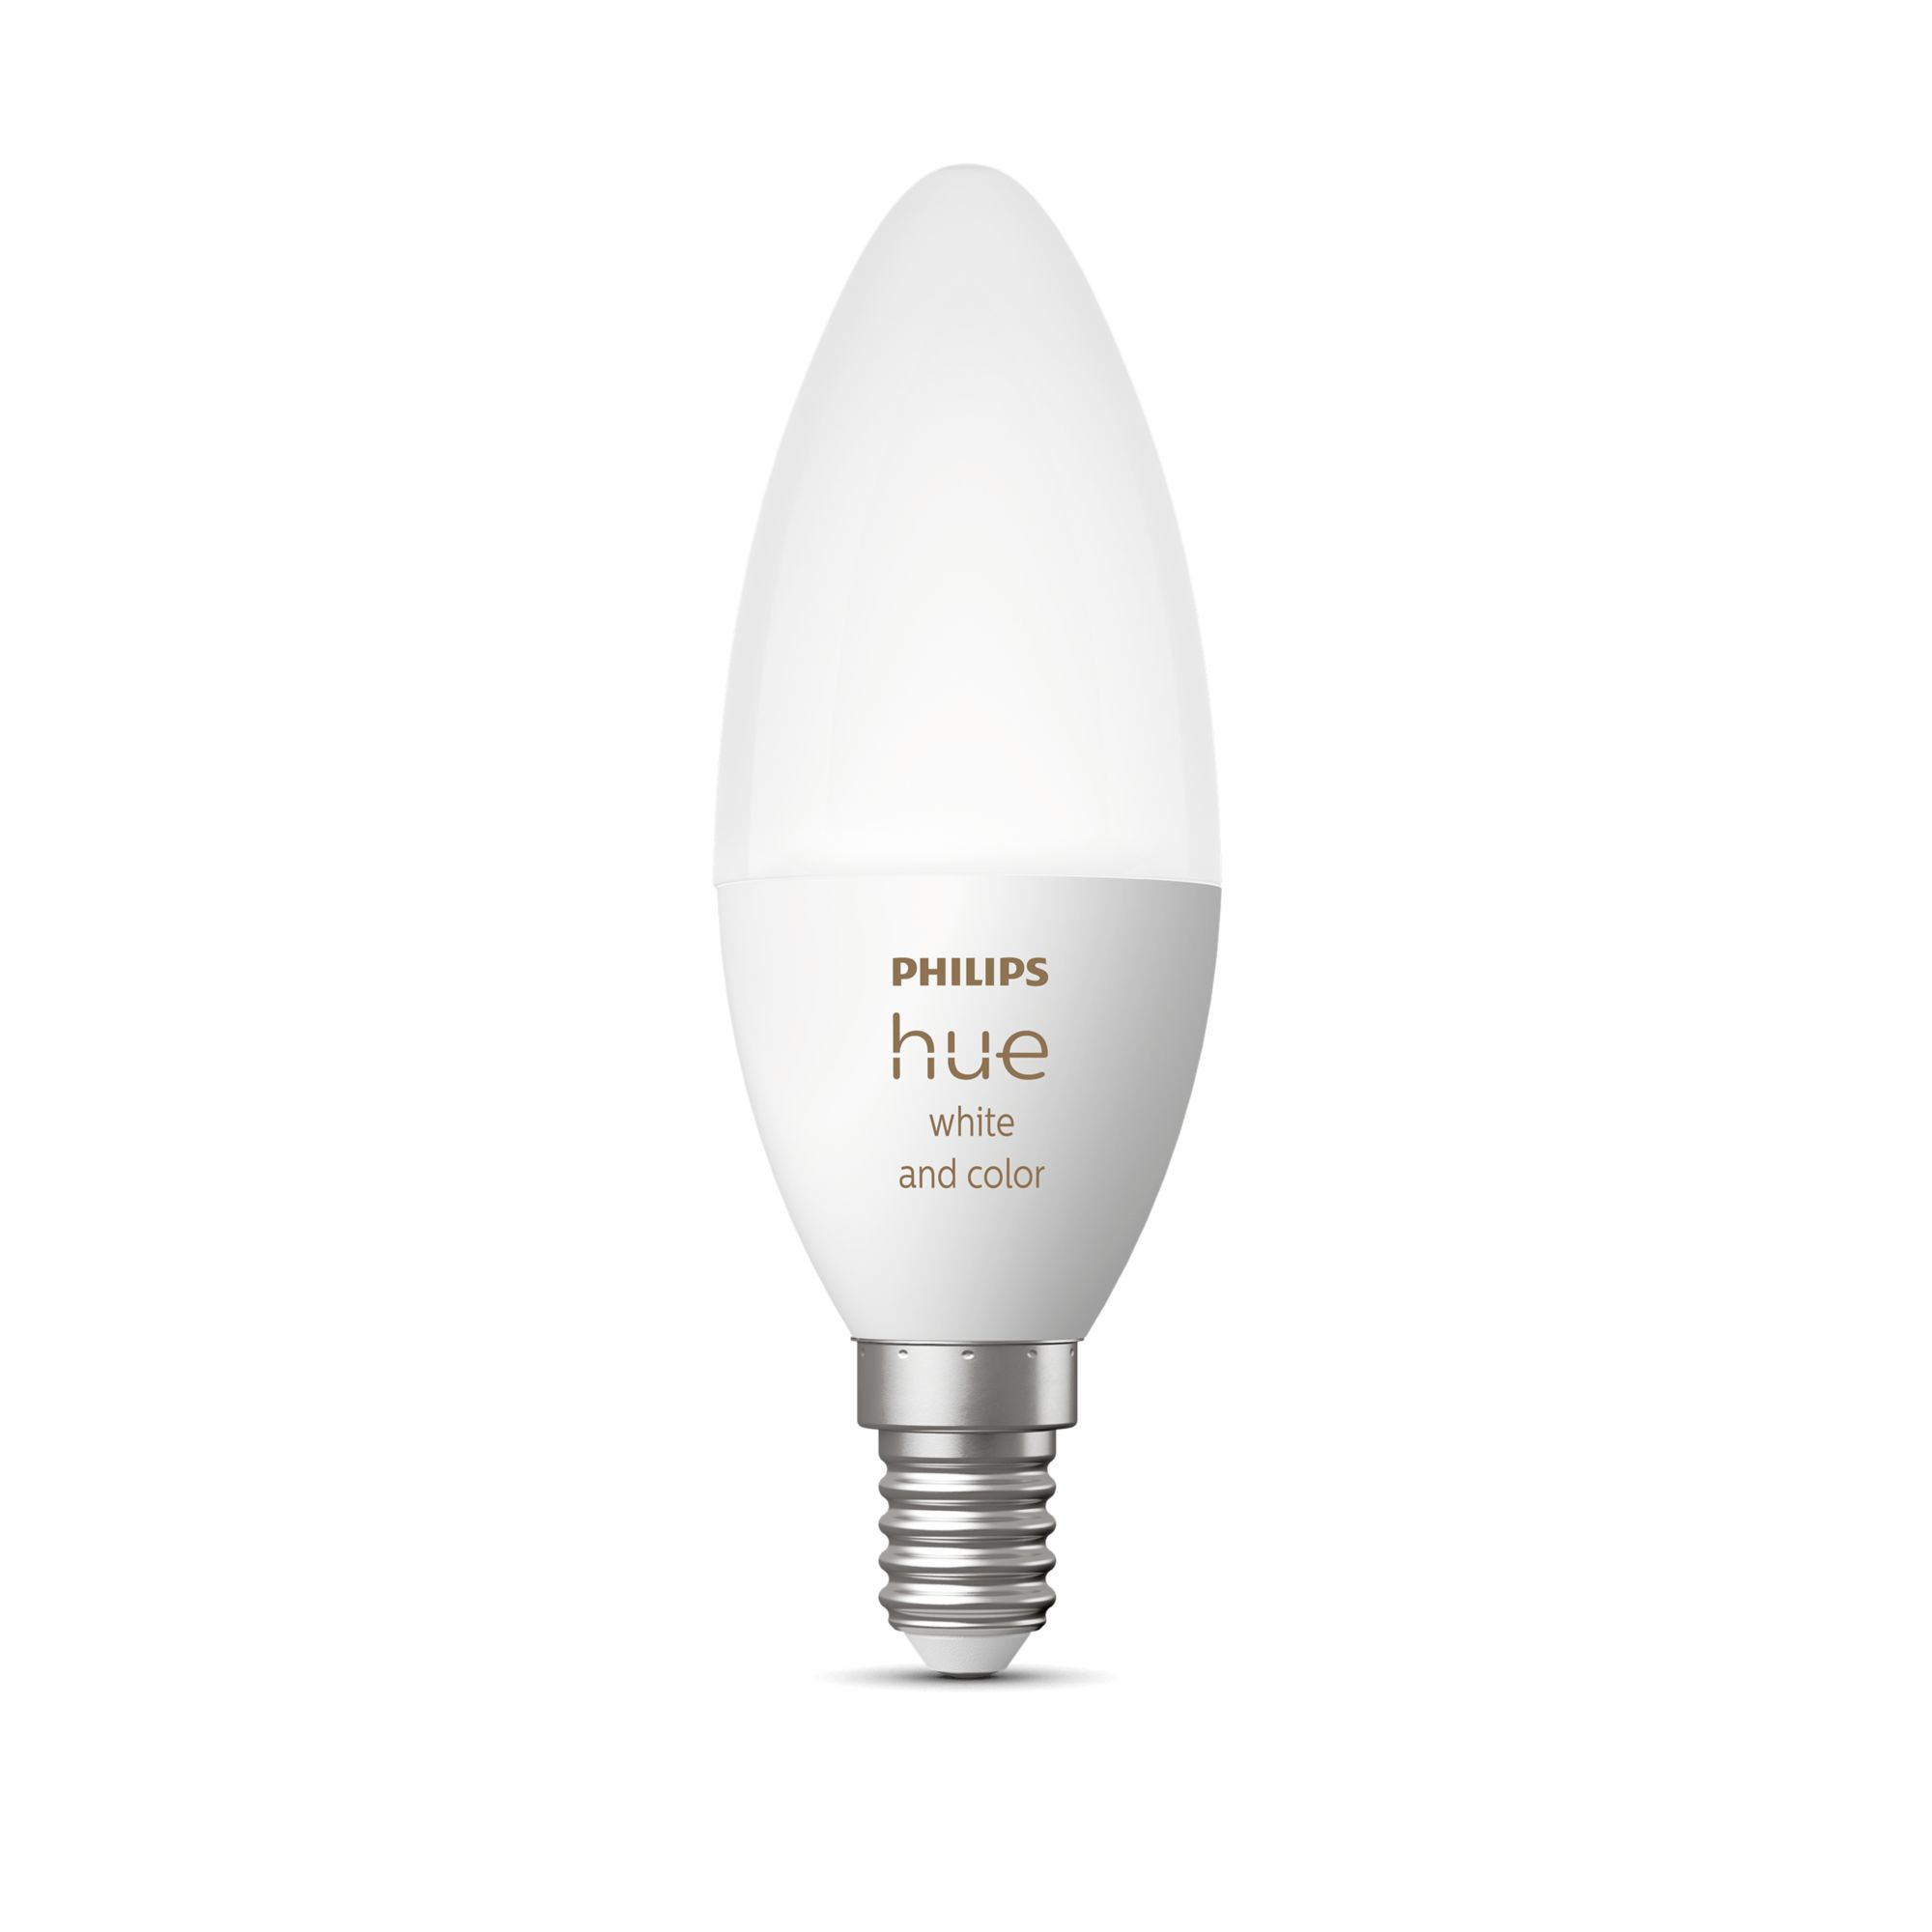 Philips by Signify Hue White and Color ambiance Lampadina singola E14 [8718699726317]